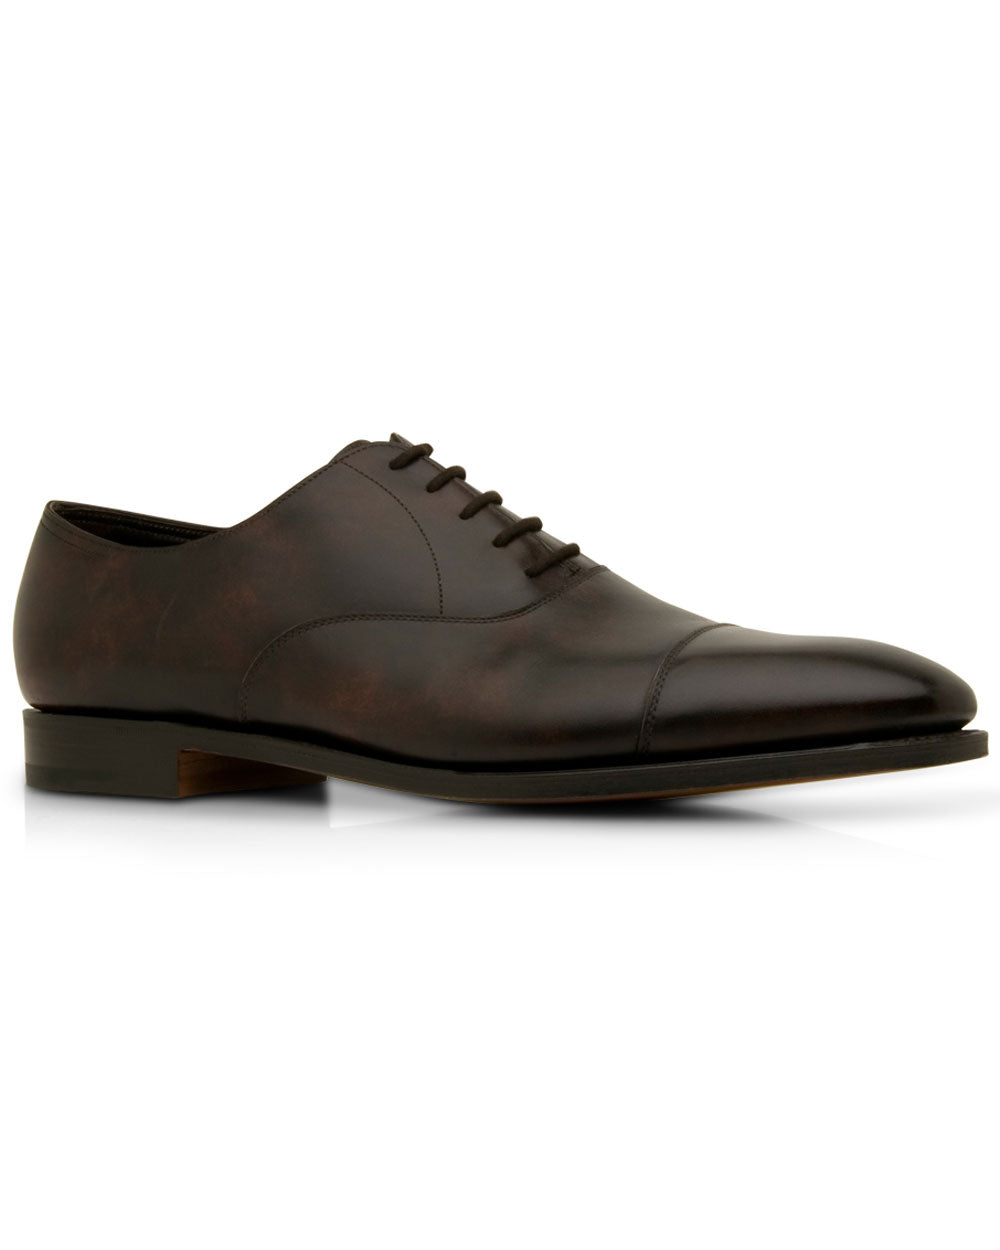 City II Leather Oxford in Dark Brown